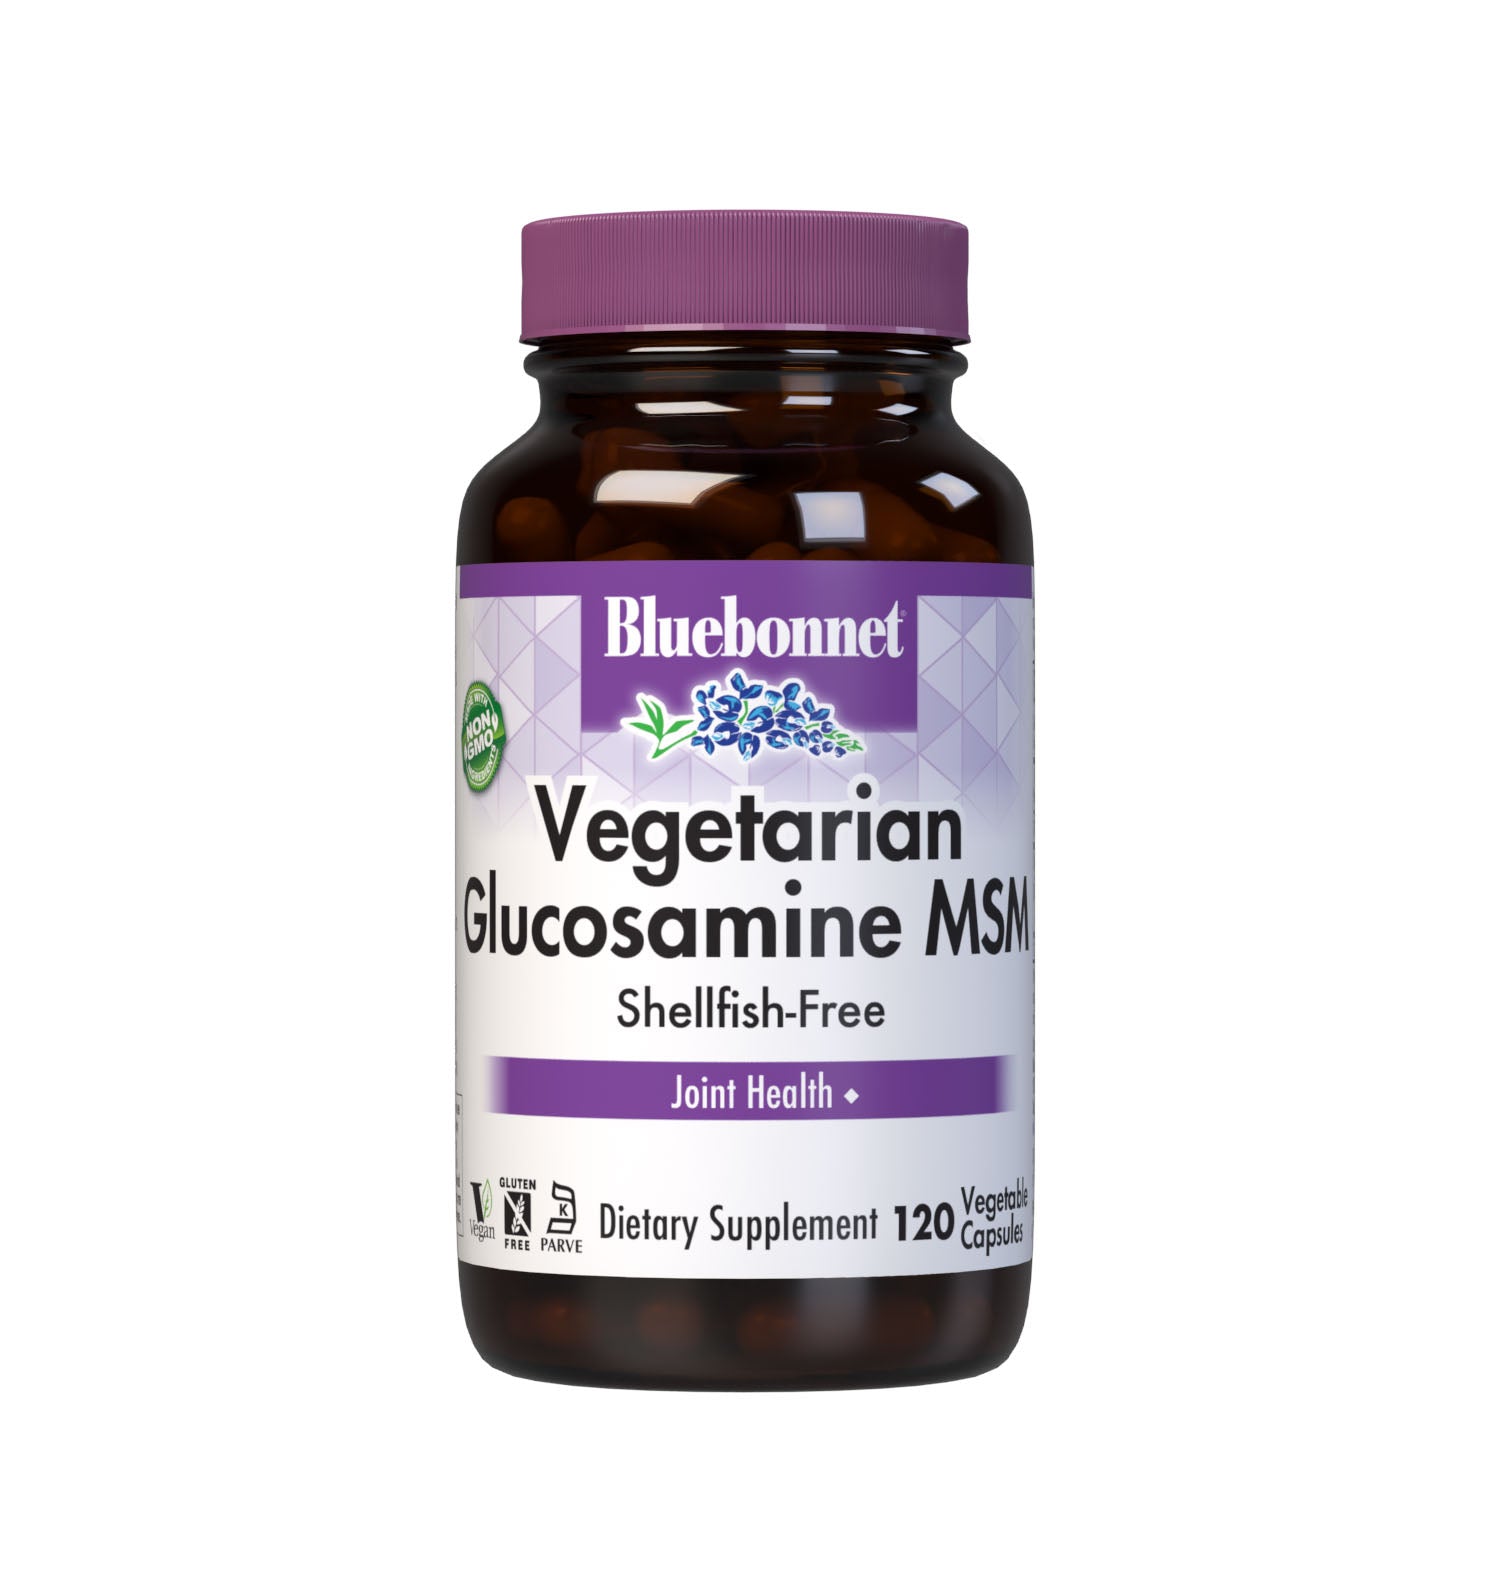 Bluebonnet’s Vegetarian Glucosamine MSM (Shellfish-Free) 120 Vegetable Capsules are formulated with a complementary, vegetarian blend of glucosamine hydrochloride known as GreenGrown and patented OptiMSM for optimal joint health. #size_120 count